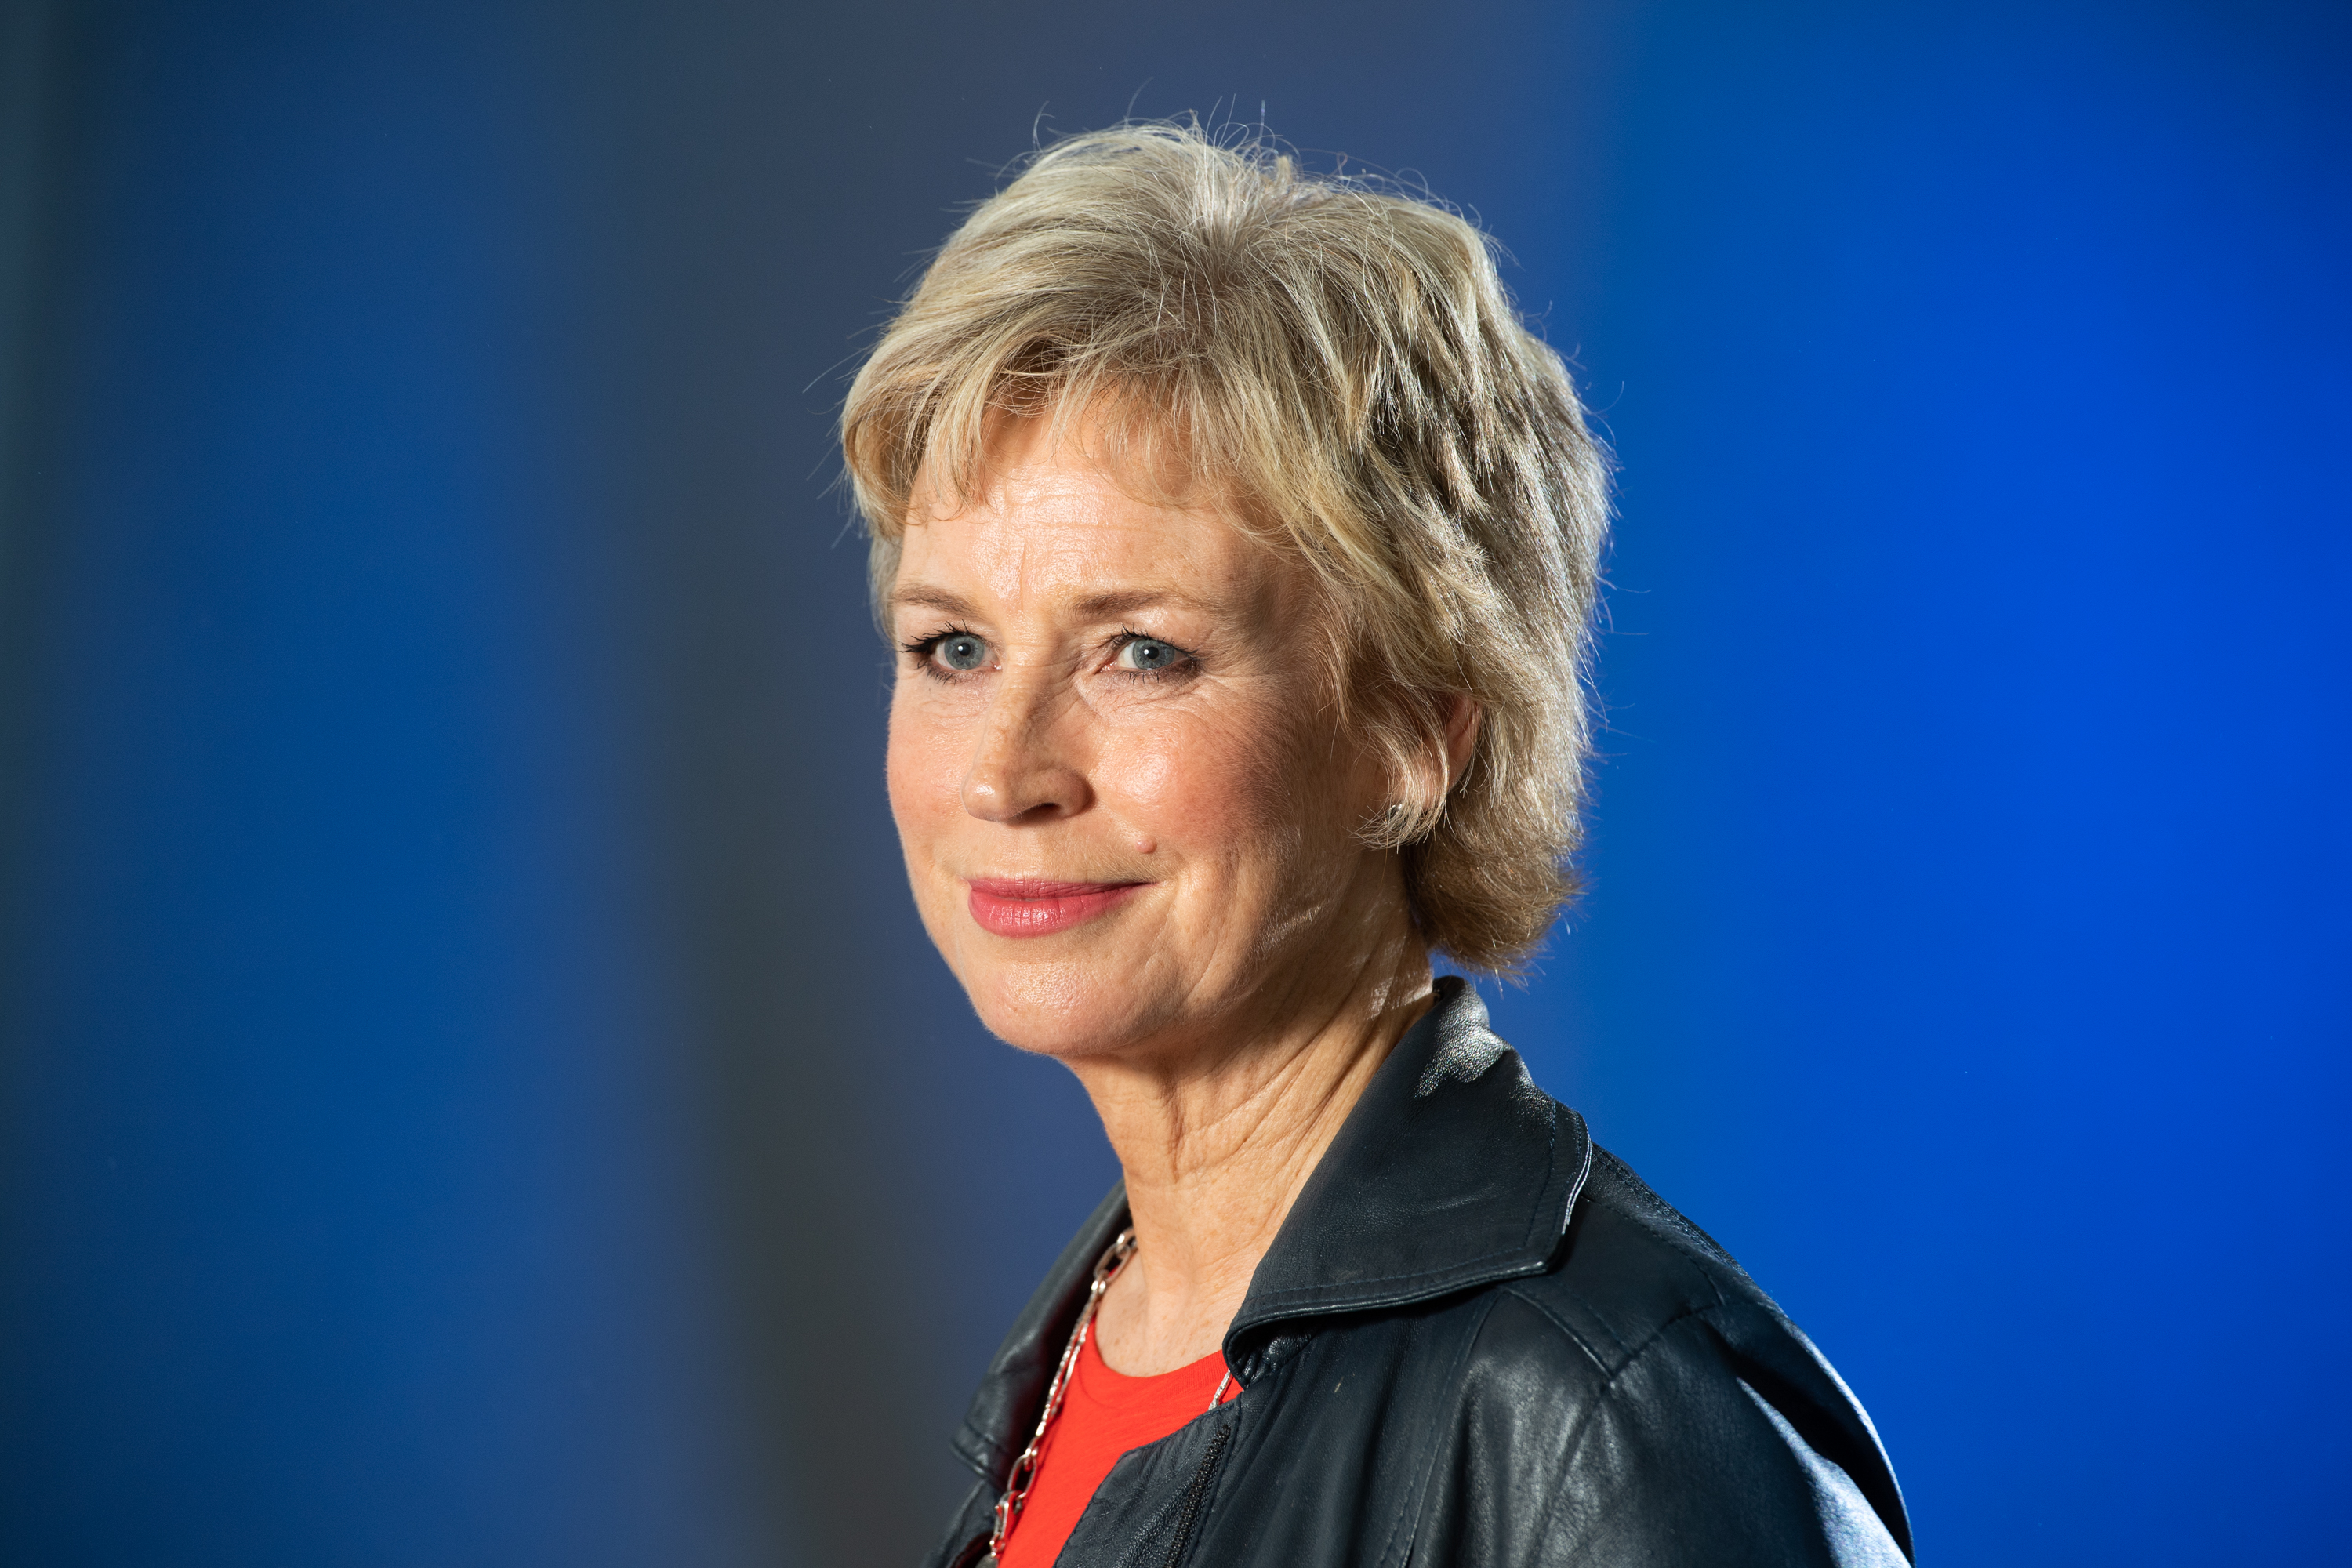 Scottish broadcaster and writer Sally Magnusson at the annual Edinburgh International Book Festival at Charlotte Square Gardens on August 19, 2018 in Edinburgh, Scotland.  (Photo by Roberto Ricciuti/Getty Images)